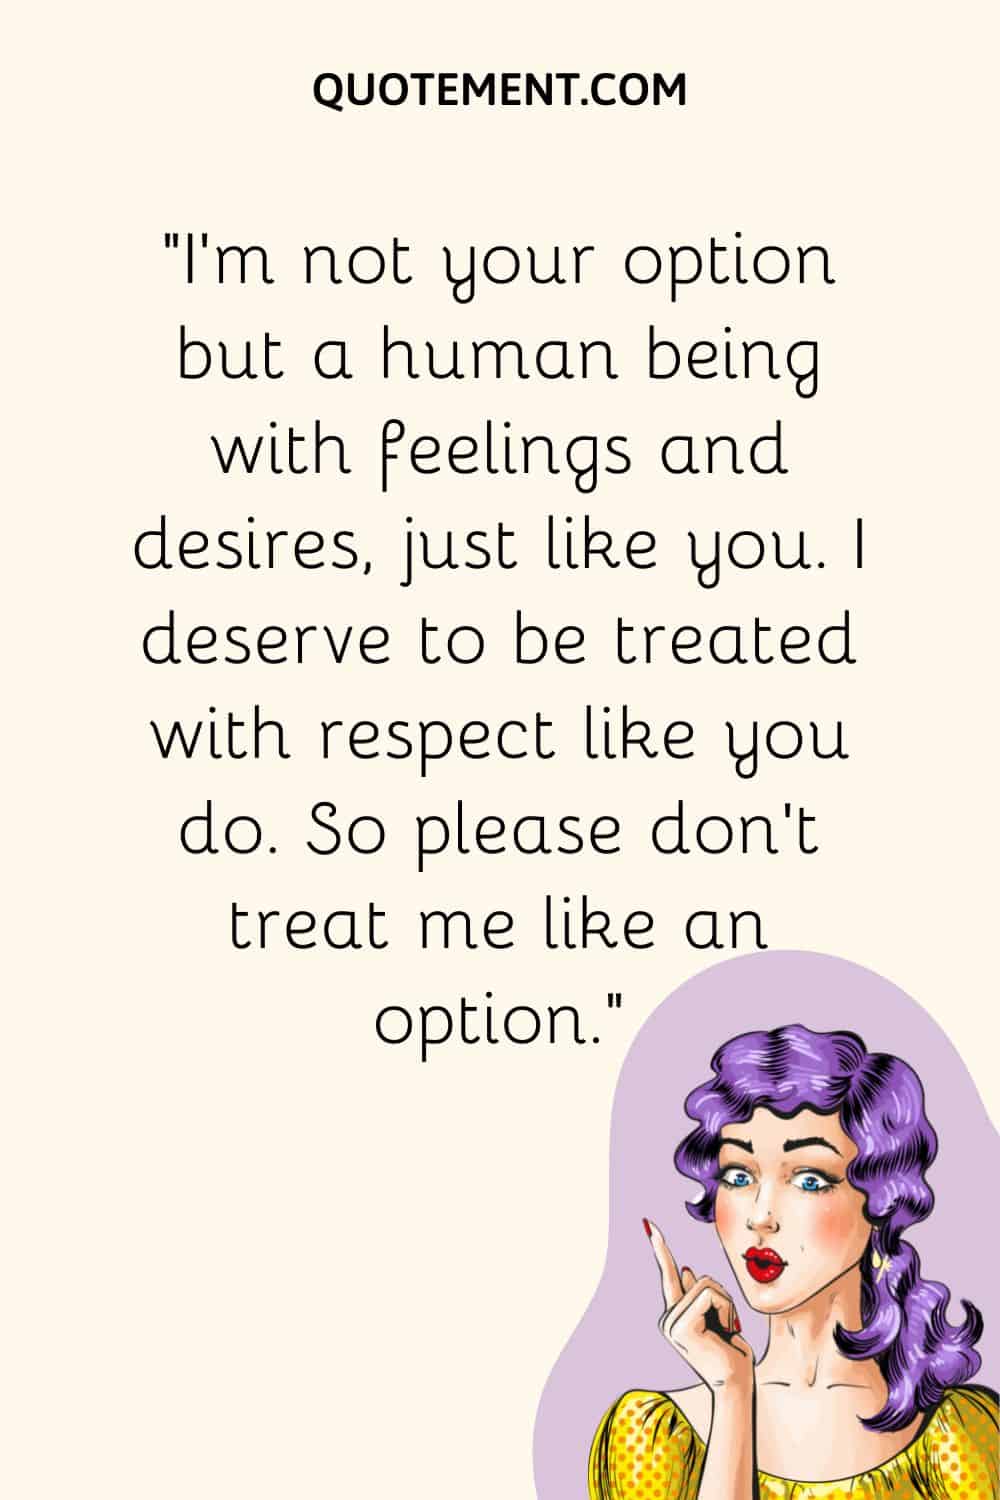 I deserve to be treated with respect like you do.